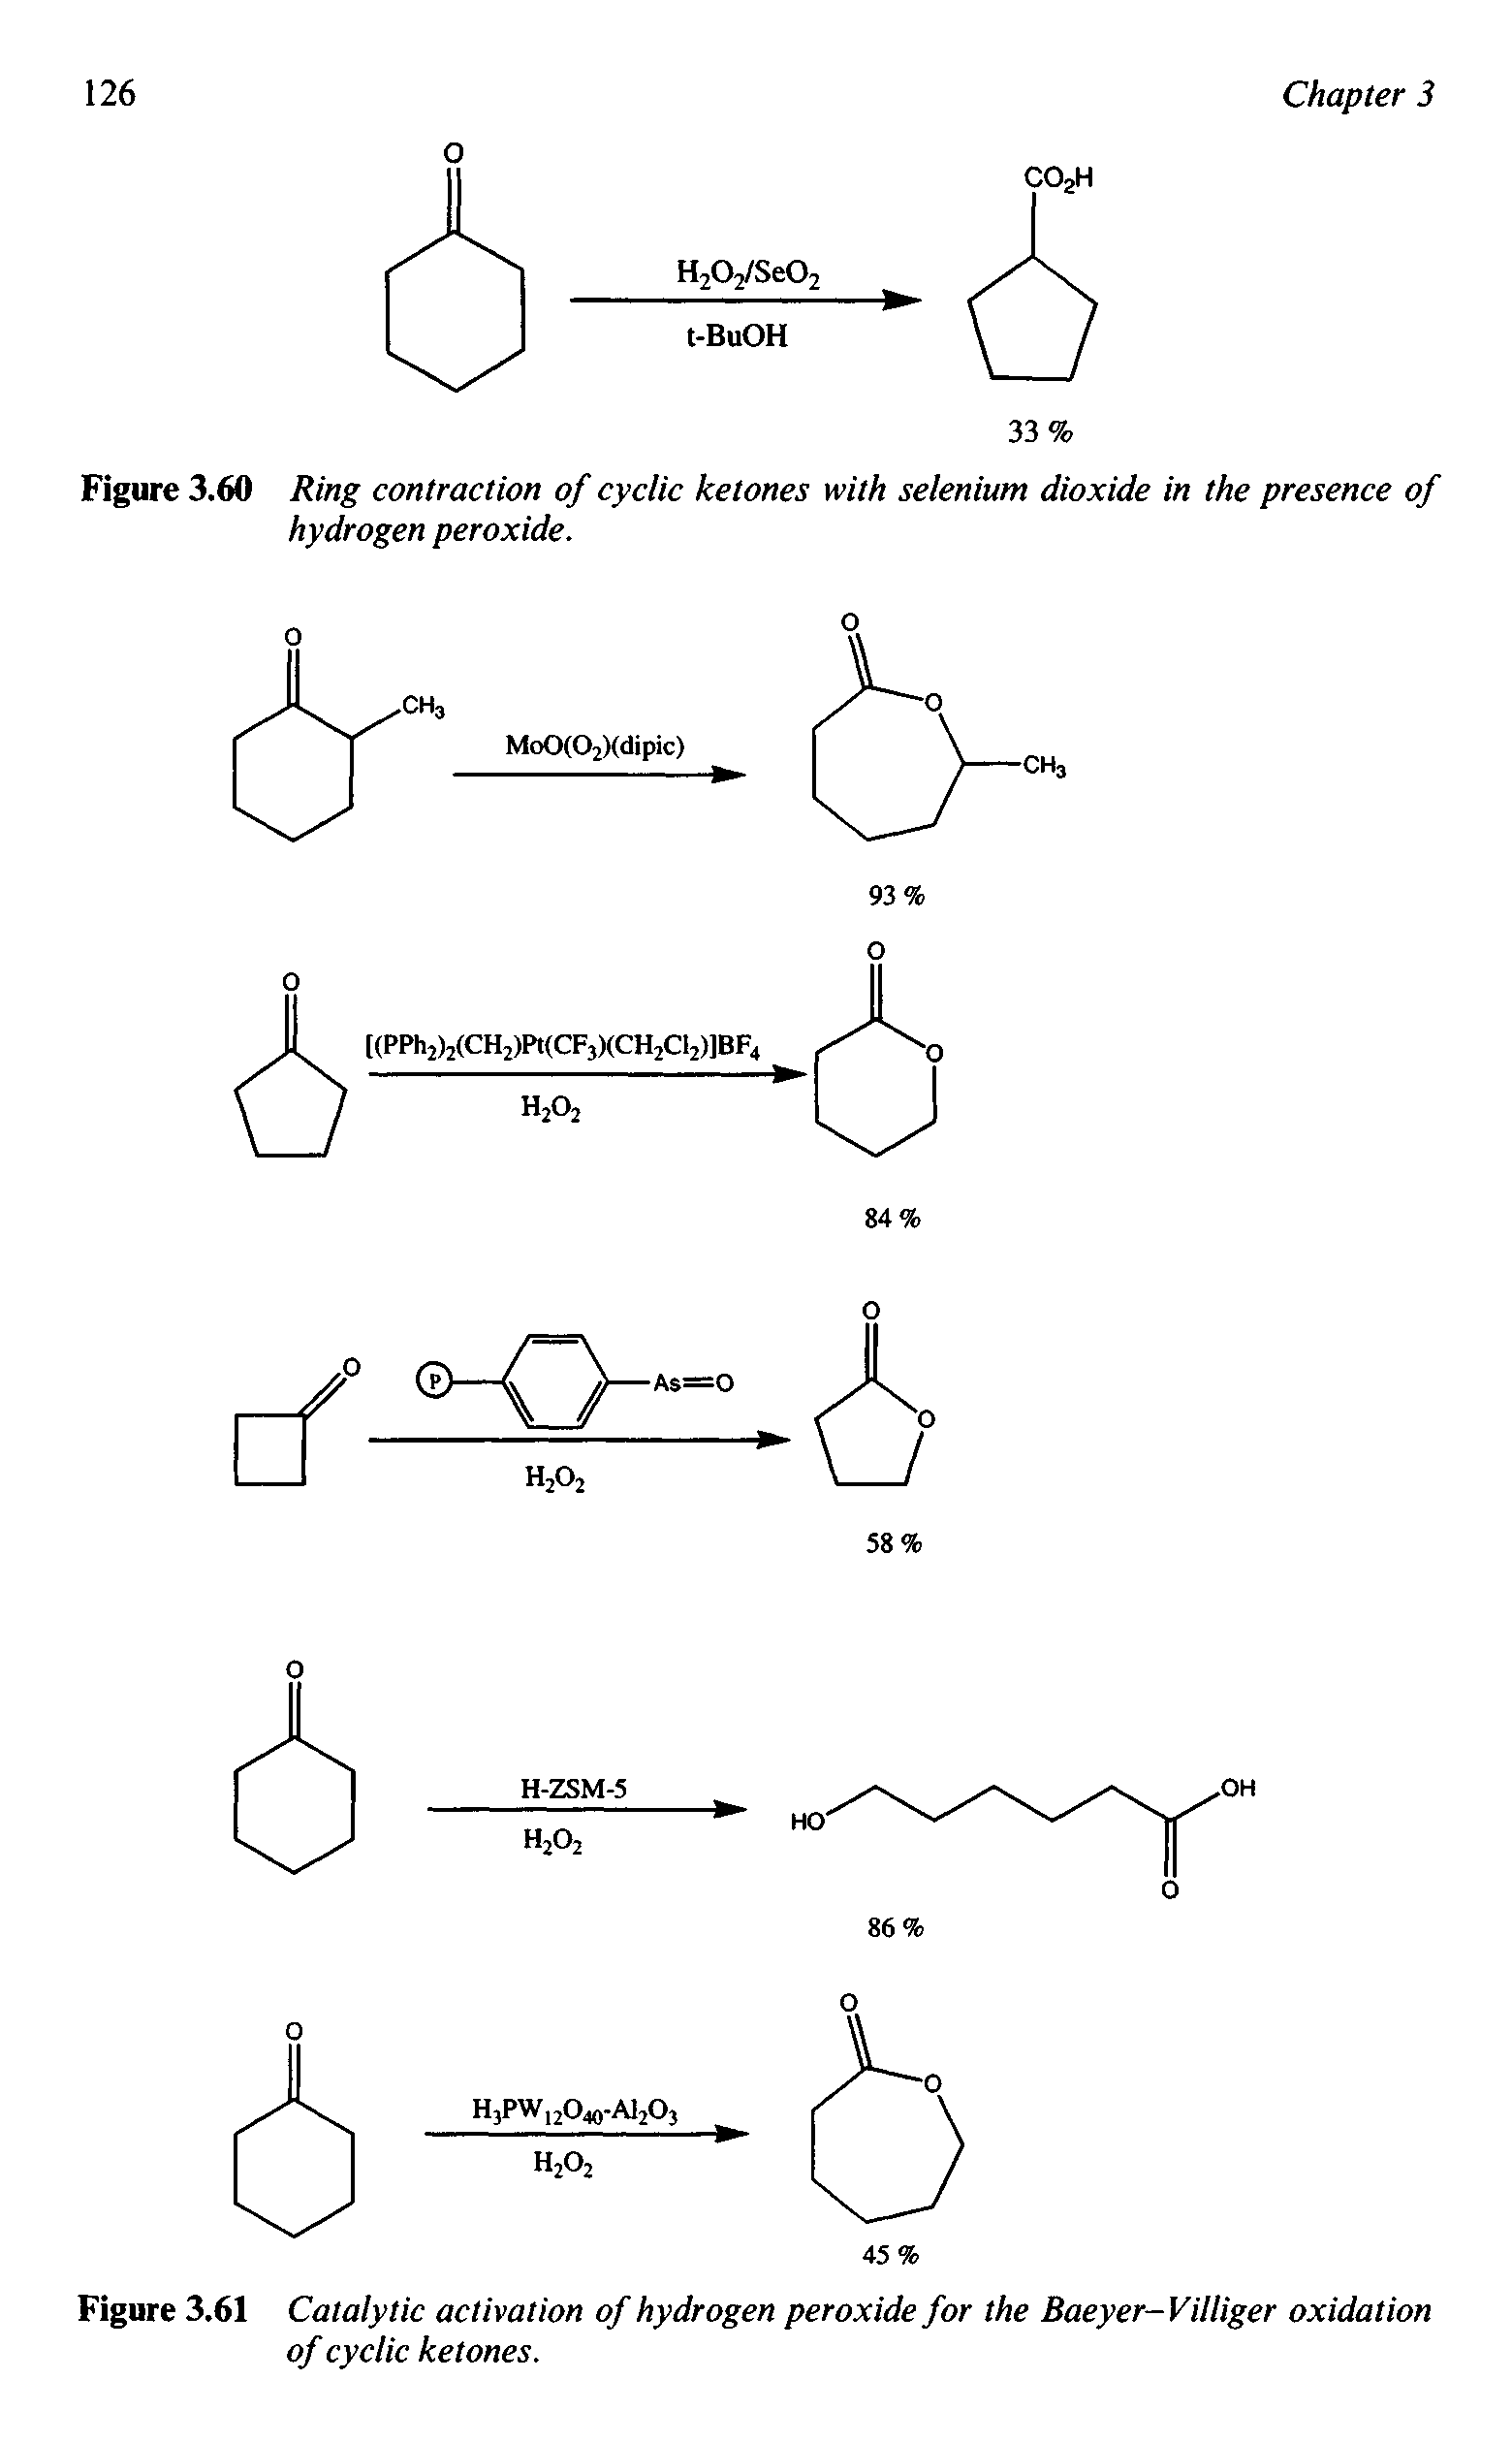 Figure 3.60 Ring contraction of cyclic ketones with selenium dioxide in the presence of hydrogen peroxide.